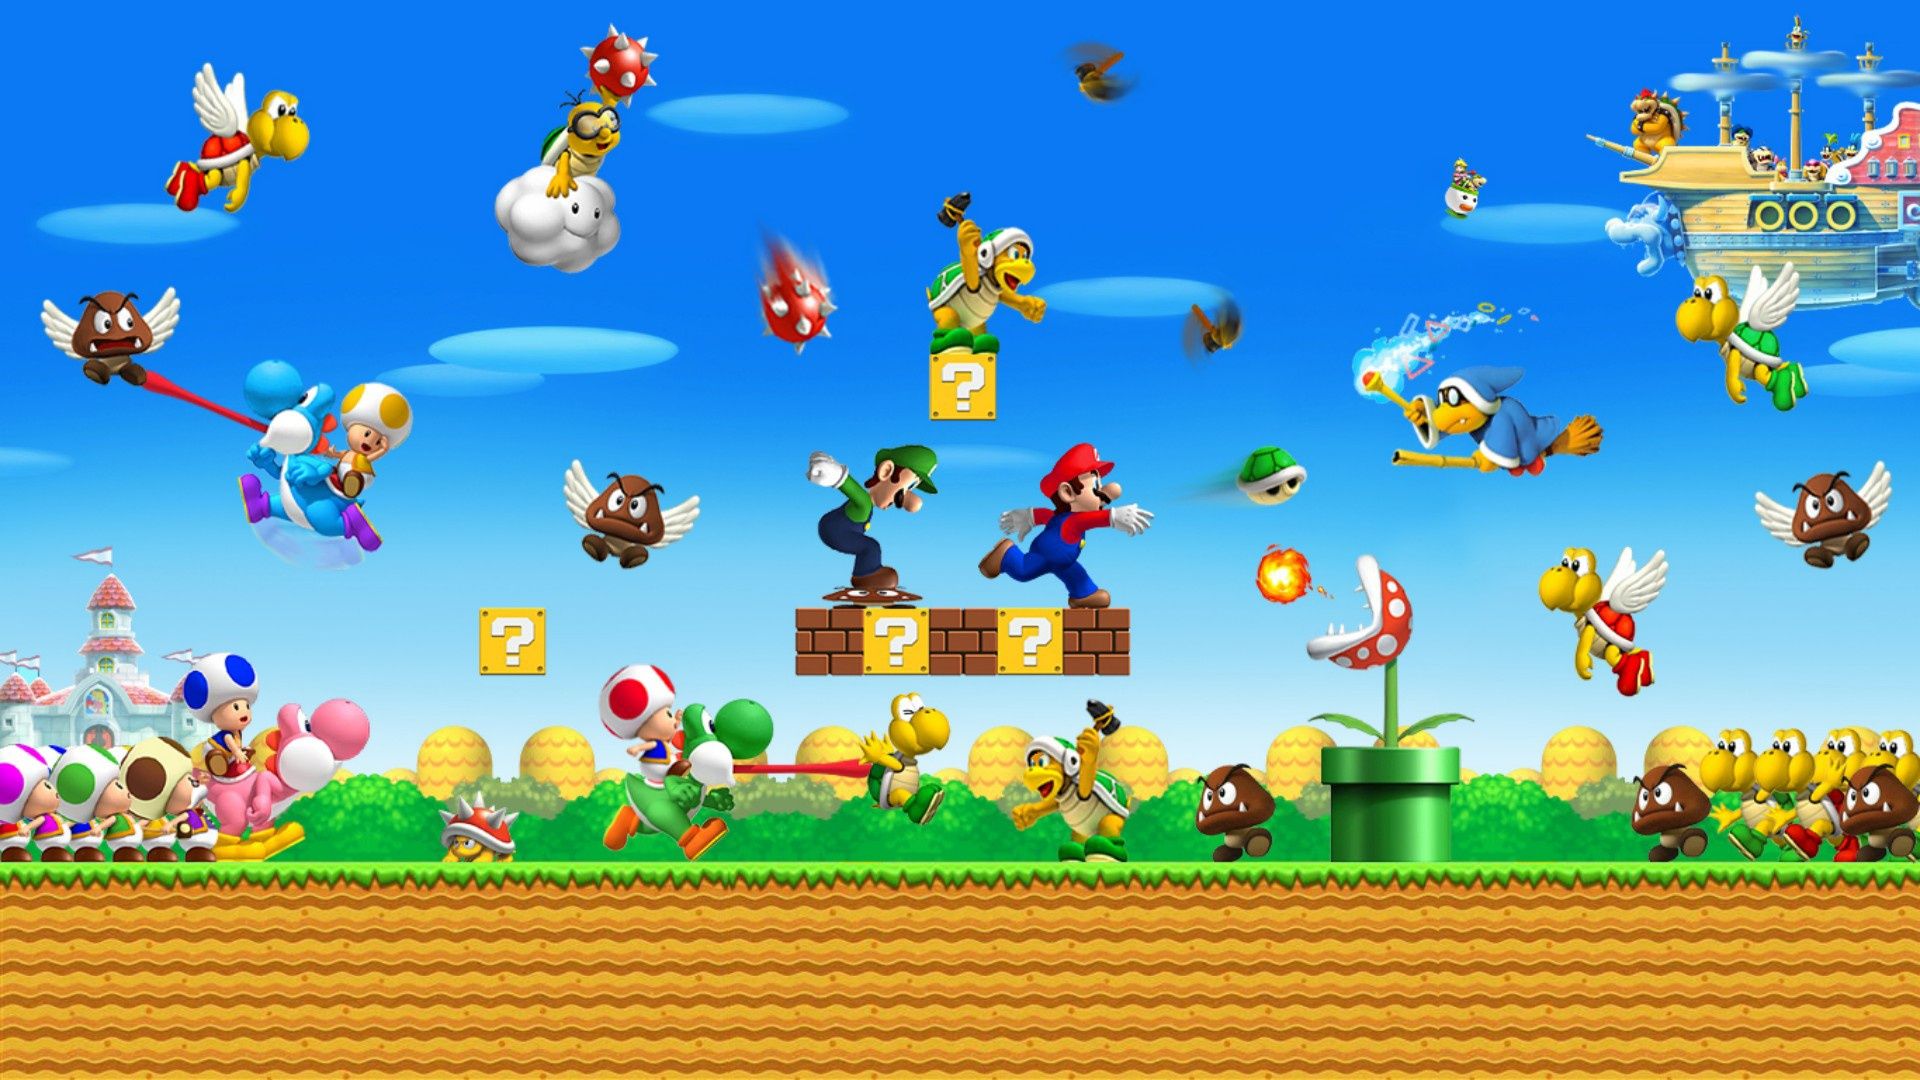 World of super mario wallpapers55.com - Best Wallpapers for PCs